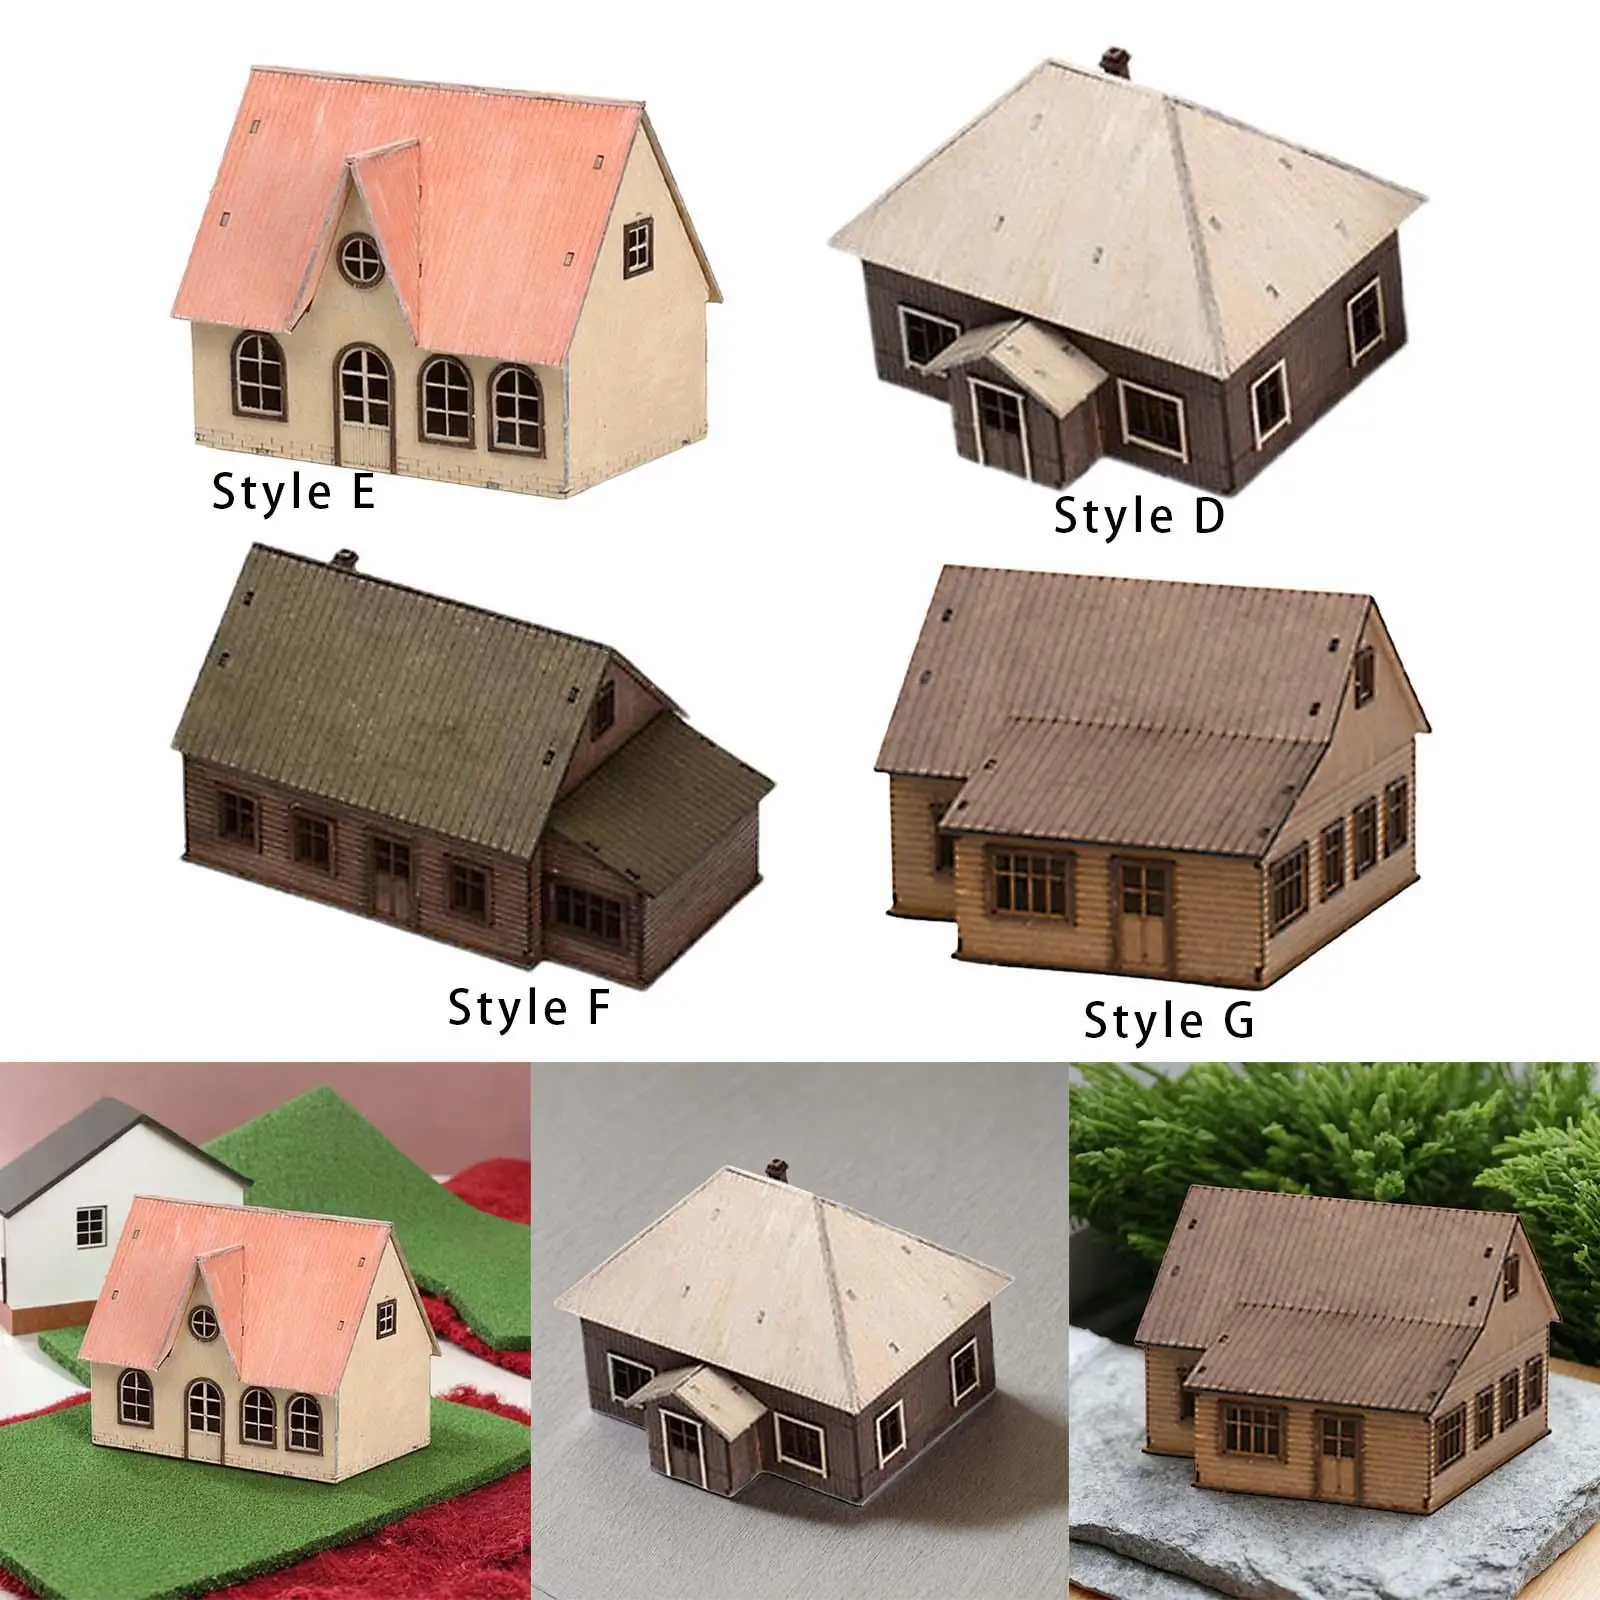 1:72 Scale Architecture Building Model Kits 3D Puzzles Wooden Puzzle Toys Unassembly for Diorama Micro Landscape Decoration